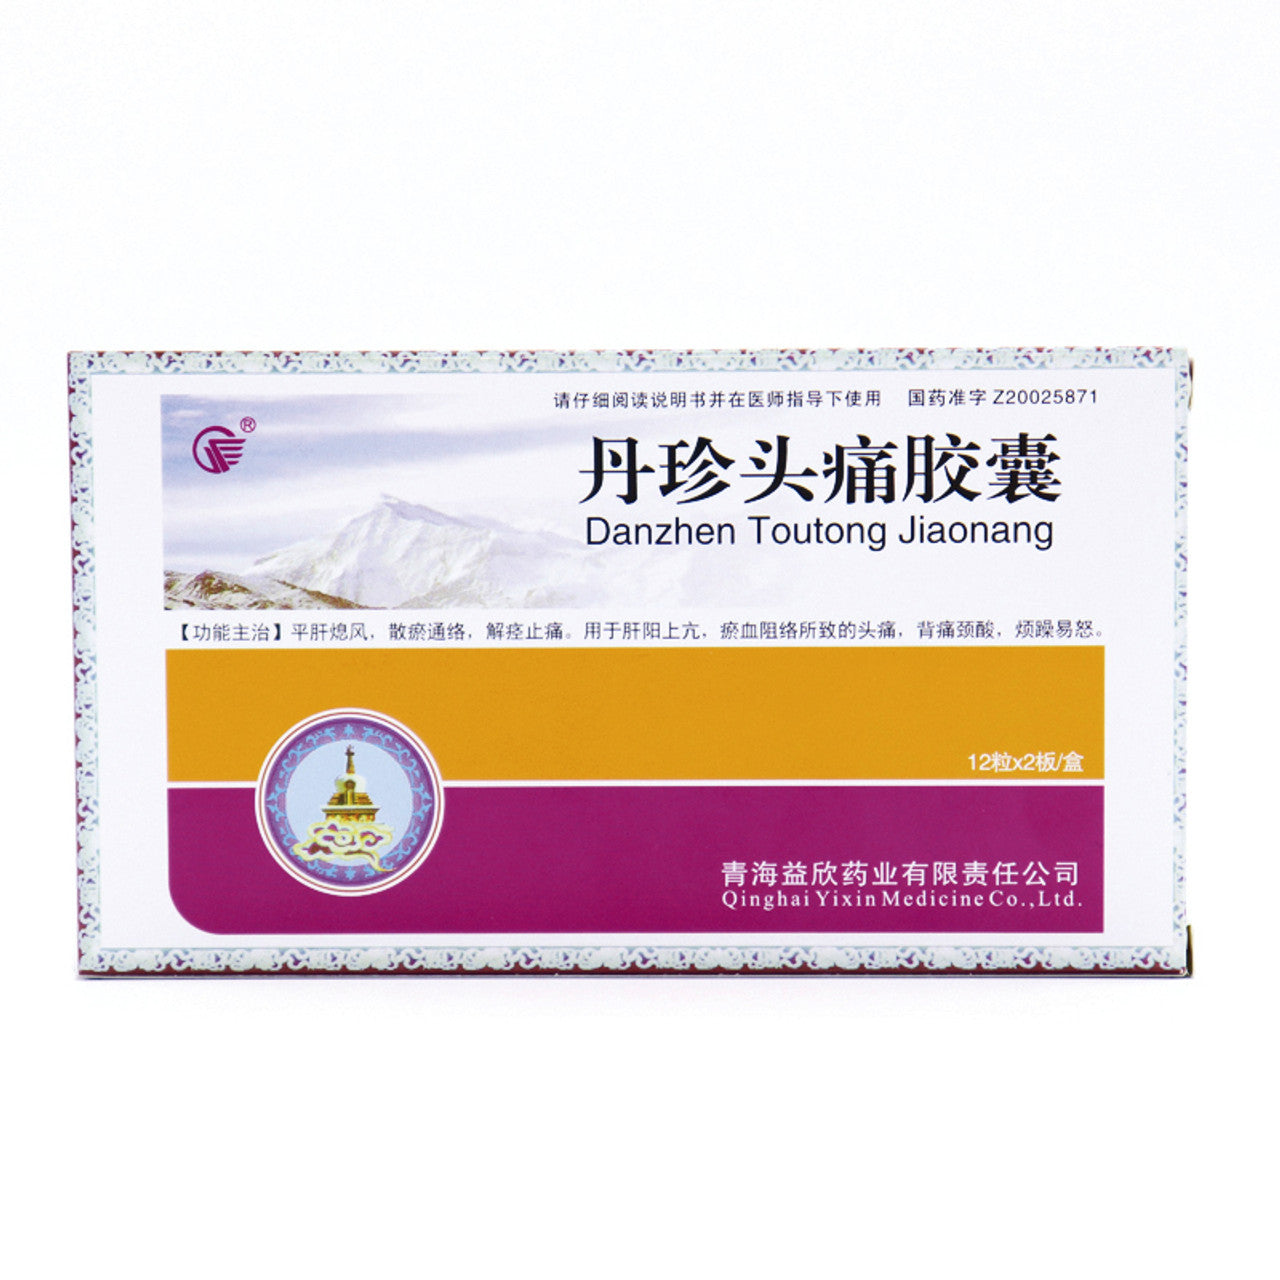 Chinese Herbs. Brand Yixin. Danzhen Toutong Jiaonang or Danzhen Toutong Capsules or Dan Zhen Tou Tong Jiao Nang or Dan Zhen Tou Tong Capsules or DanZhenTouTongJiaoNang for headache caused by hyperactivity of liver yang, blood stasis and obstruction